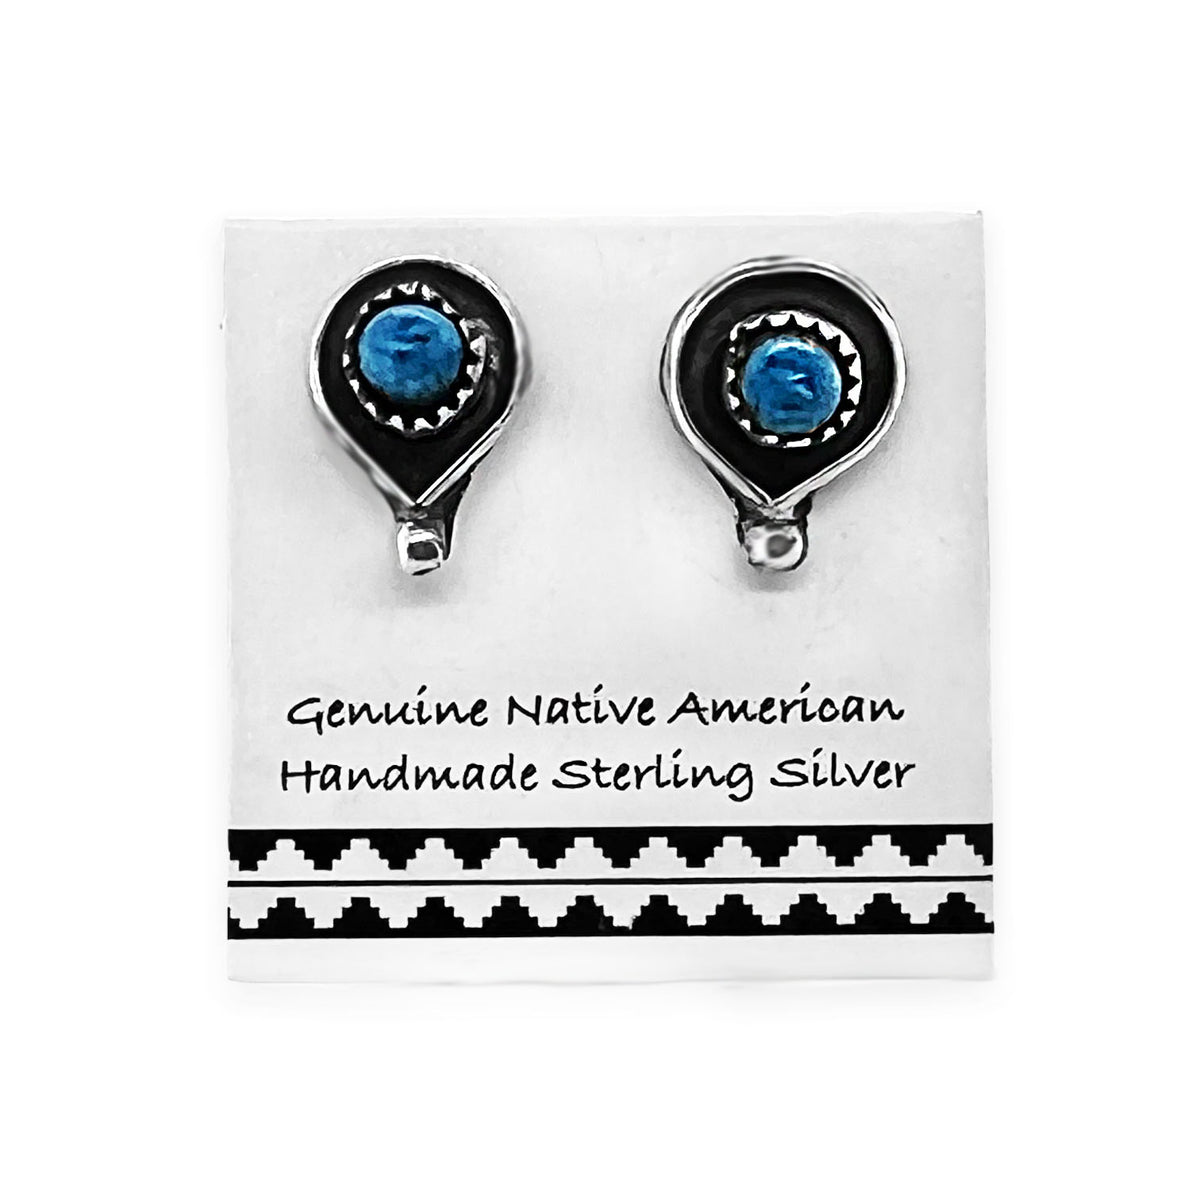 Genuine Denim Lapis Stud Earrings, 925 Sterling Silver, Authentic Native American, Handmade in the USA, Nickle Free